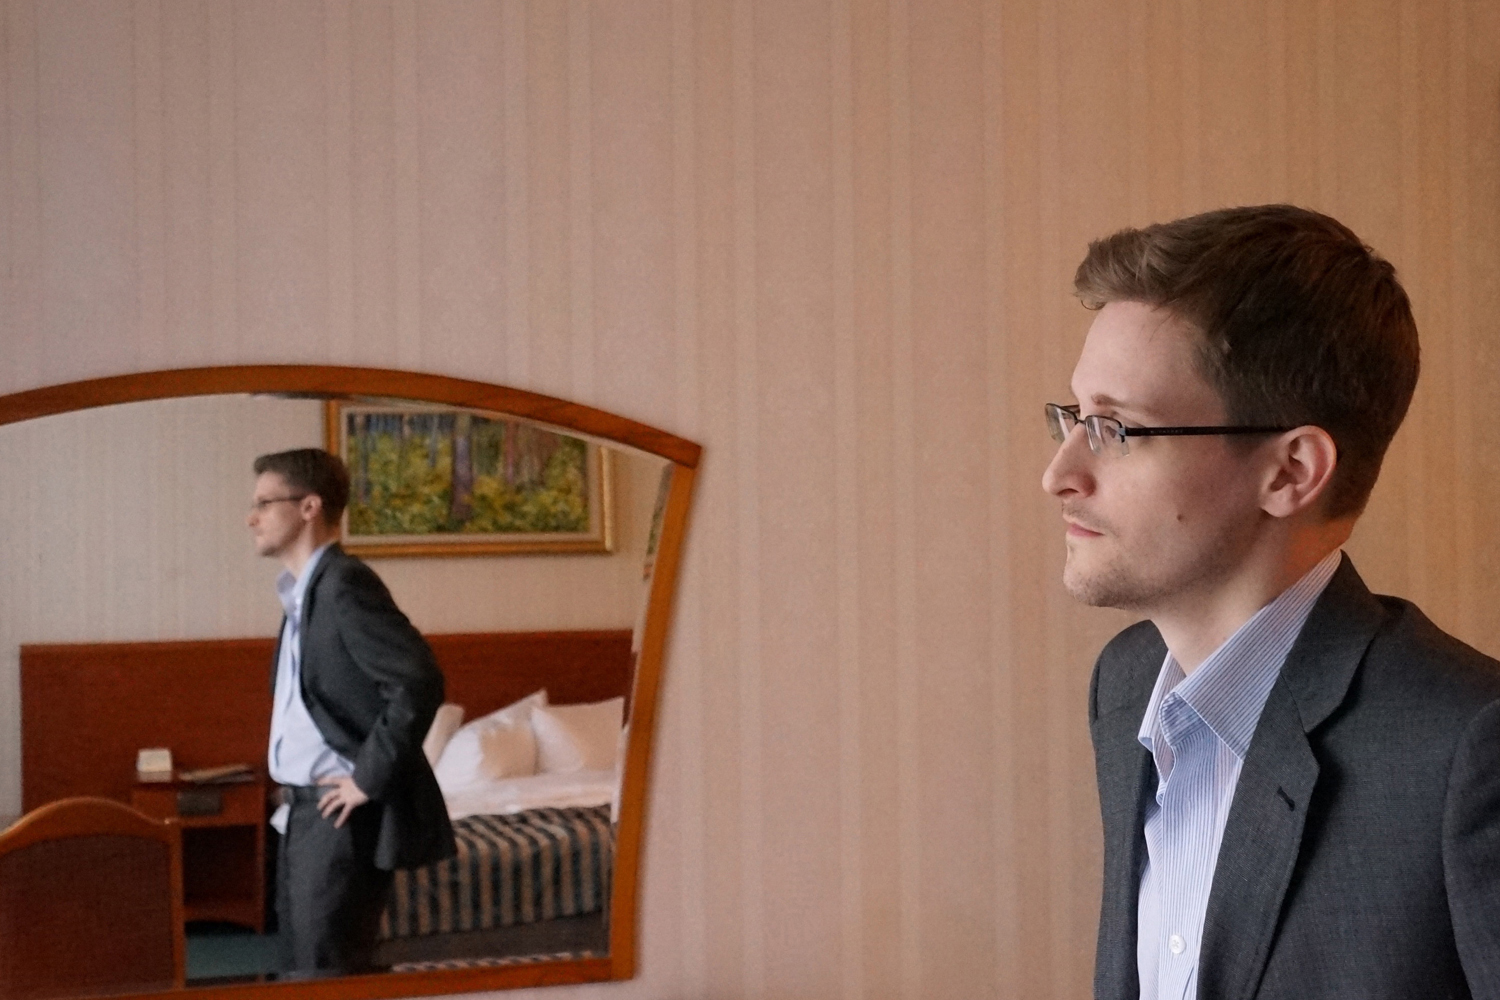 Former intelligence contractor Edward Snowden in an undisclosed location in Moscow, December 2013. (Barton Gellman—Getty Images)